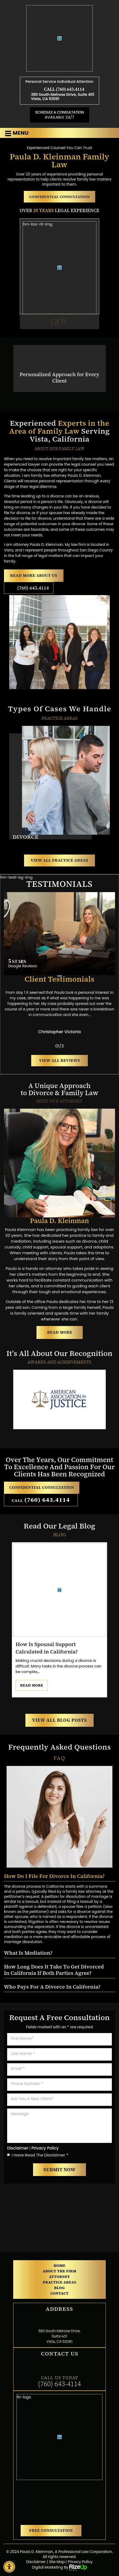 The Law Offices of Paula D. Kleinman - Vista CA Lawyers